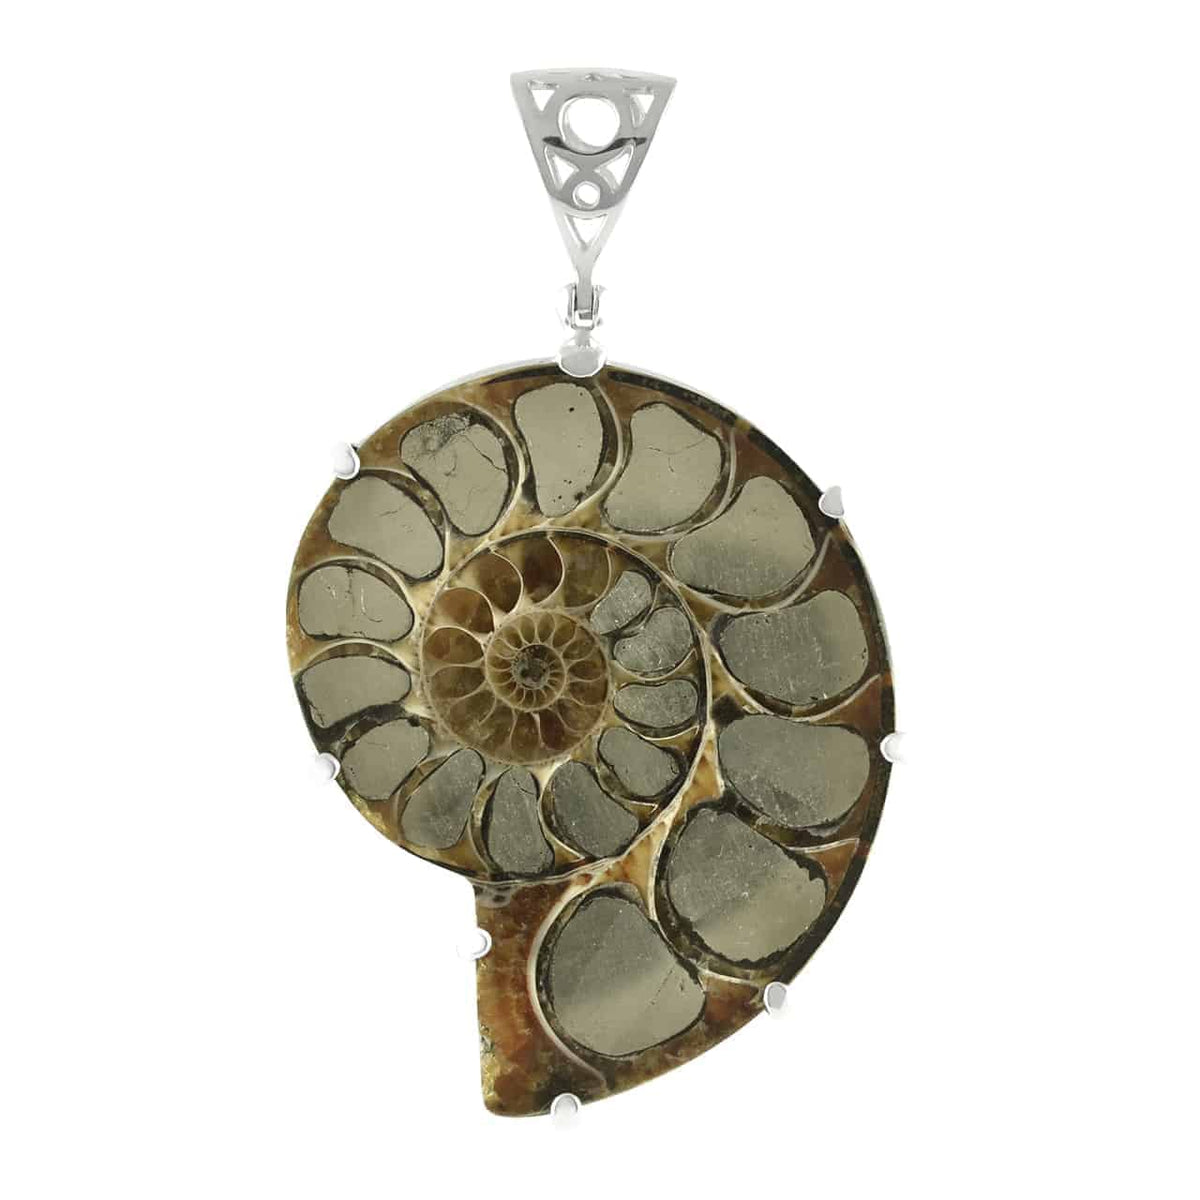 Pyrite inlaid Ammonite Pendant with sterling silver